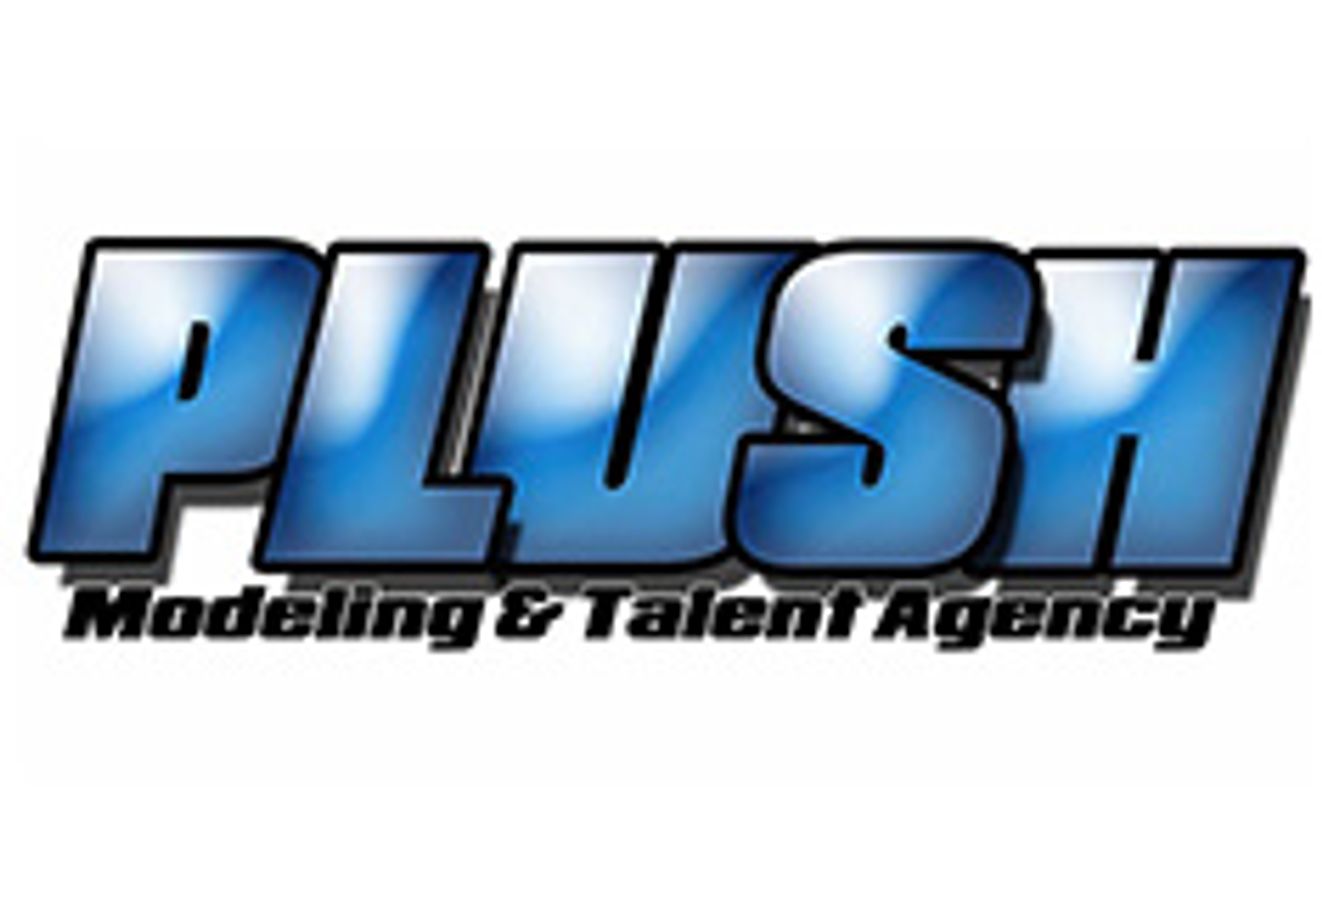 Plush Modeling And Talent Agency